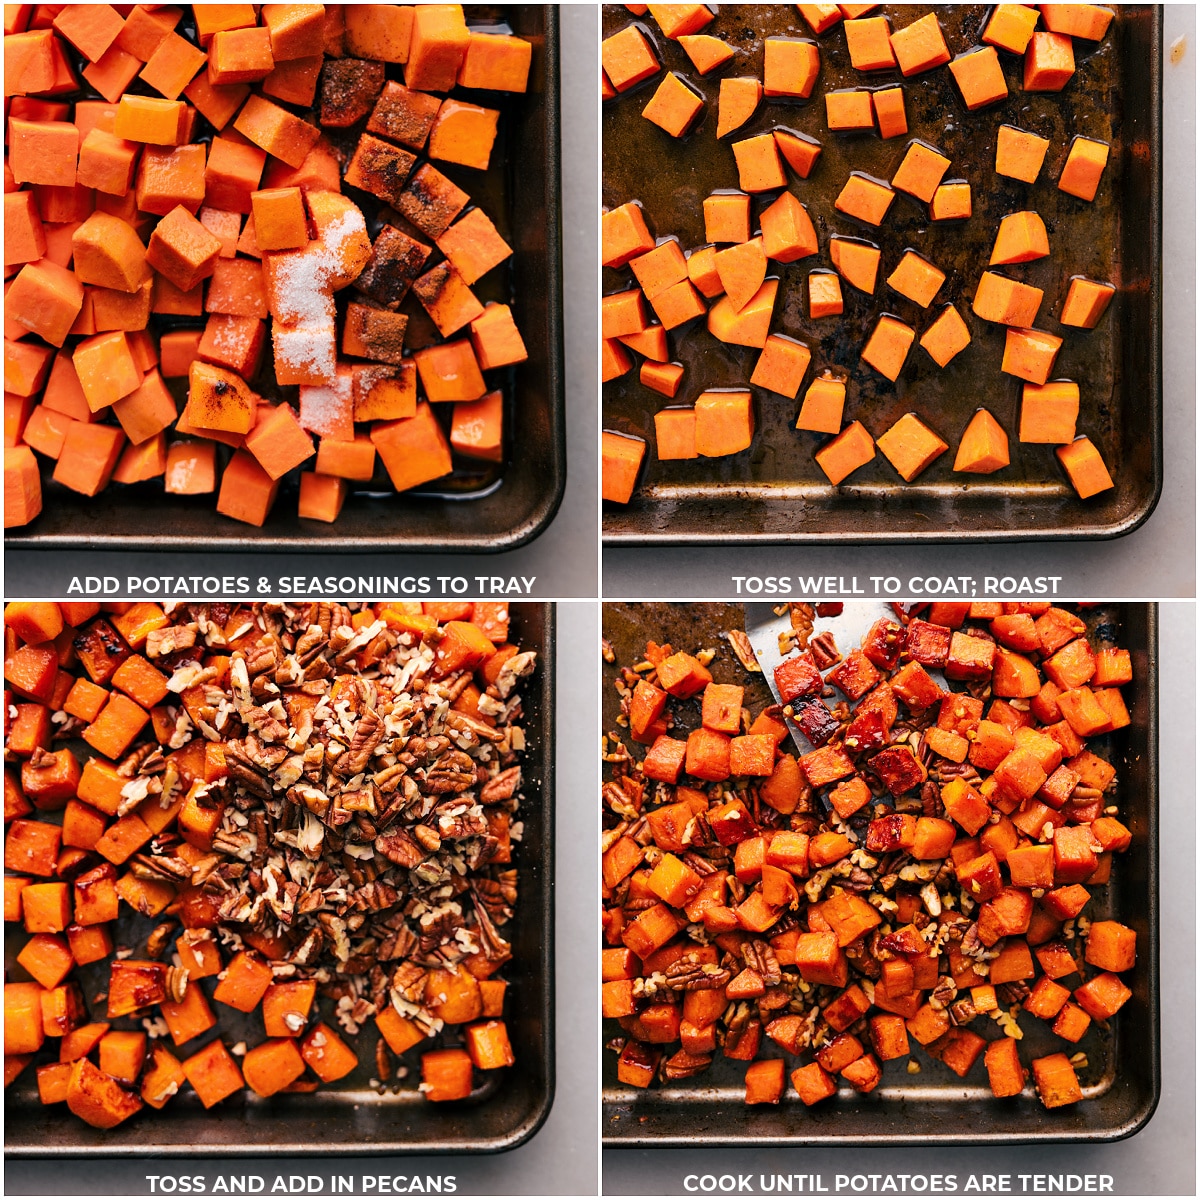 Roasting sweet potatoes: from raw, peeled chunks, to their placement on a baking sheet, and finally their transformation into golden-brown, roasted delights.